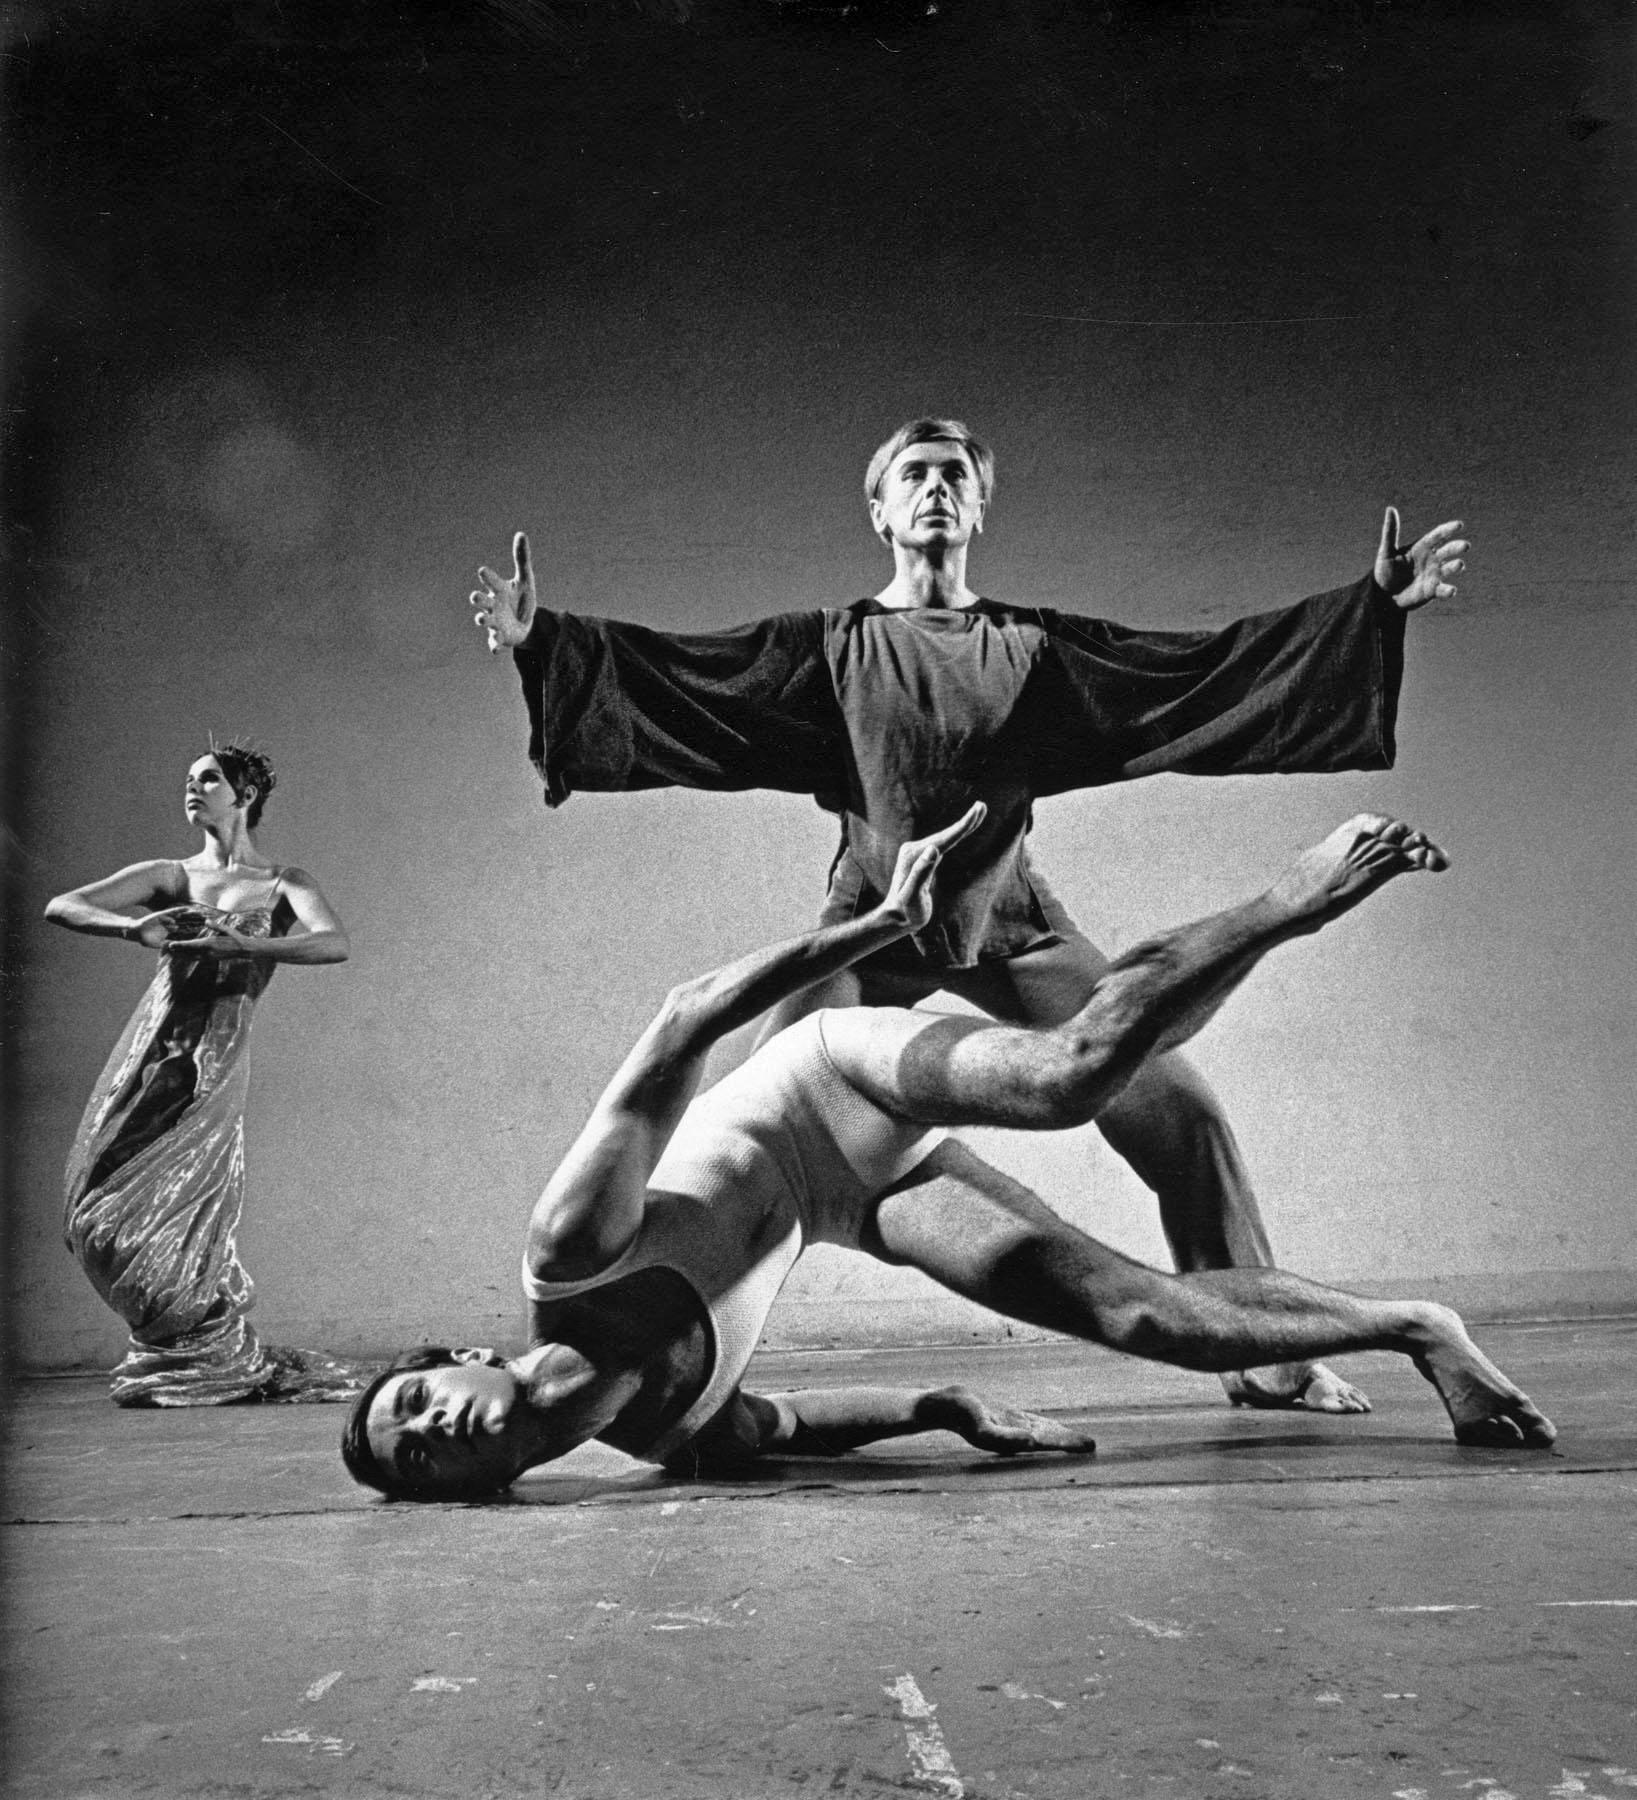 Jack Mitchell Black and White Photograph - Lucas Hoving Dance Company performing 'Icarus'